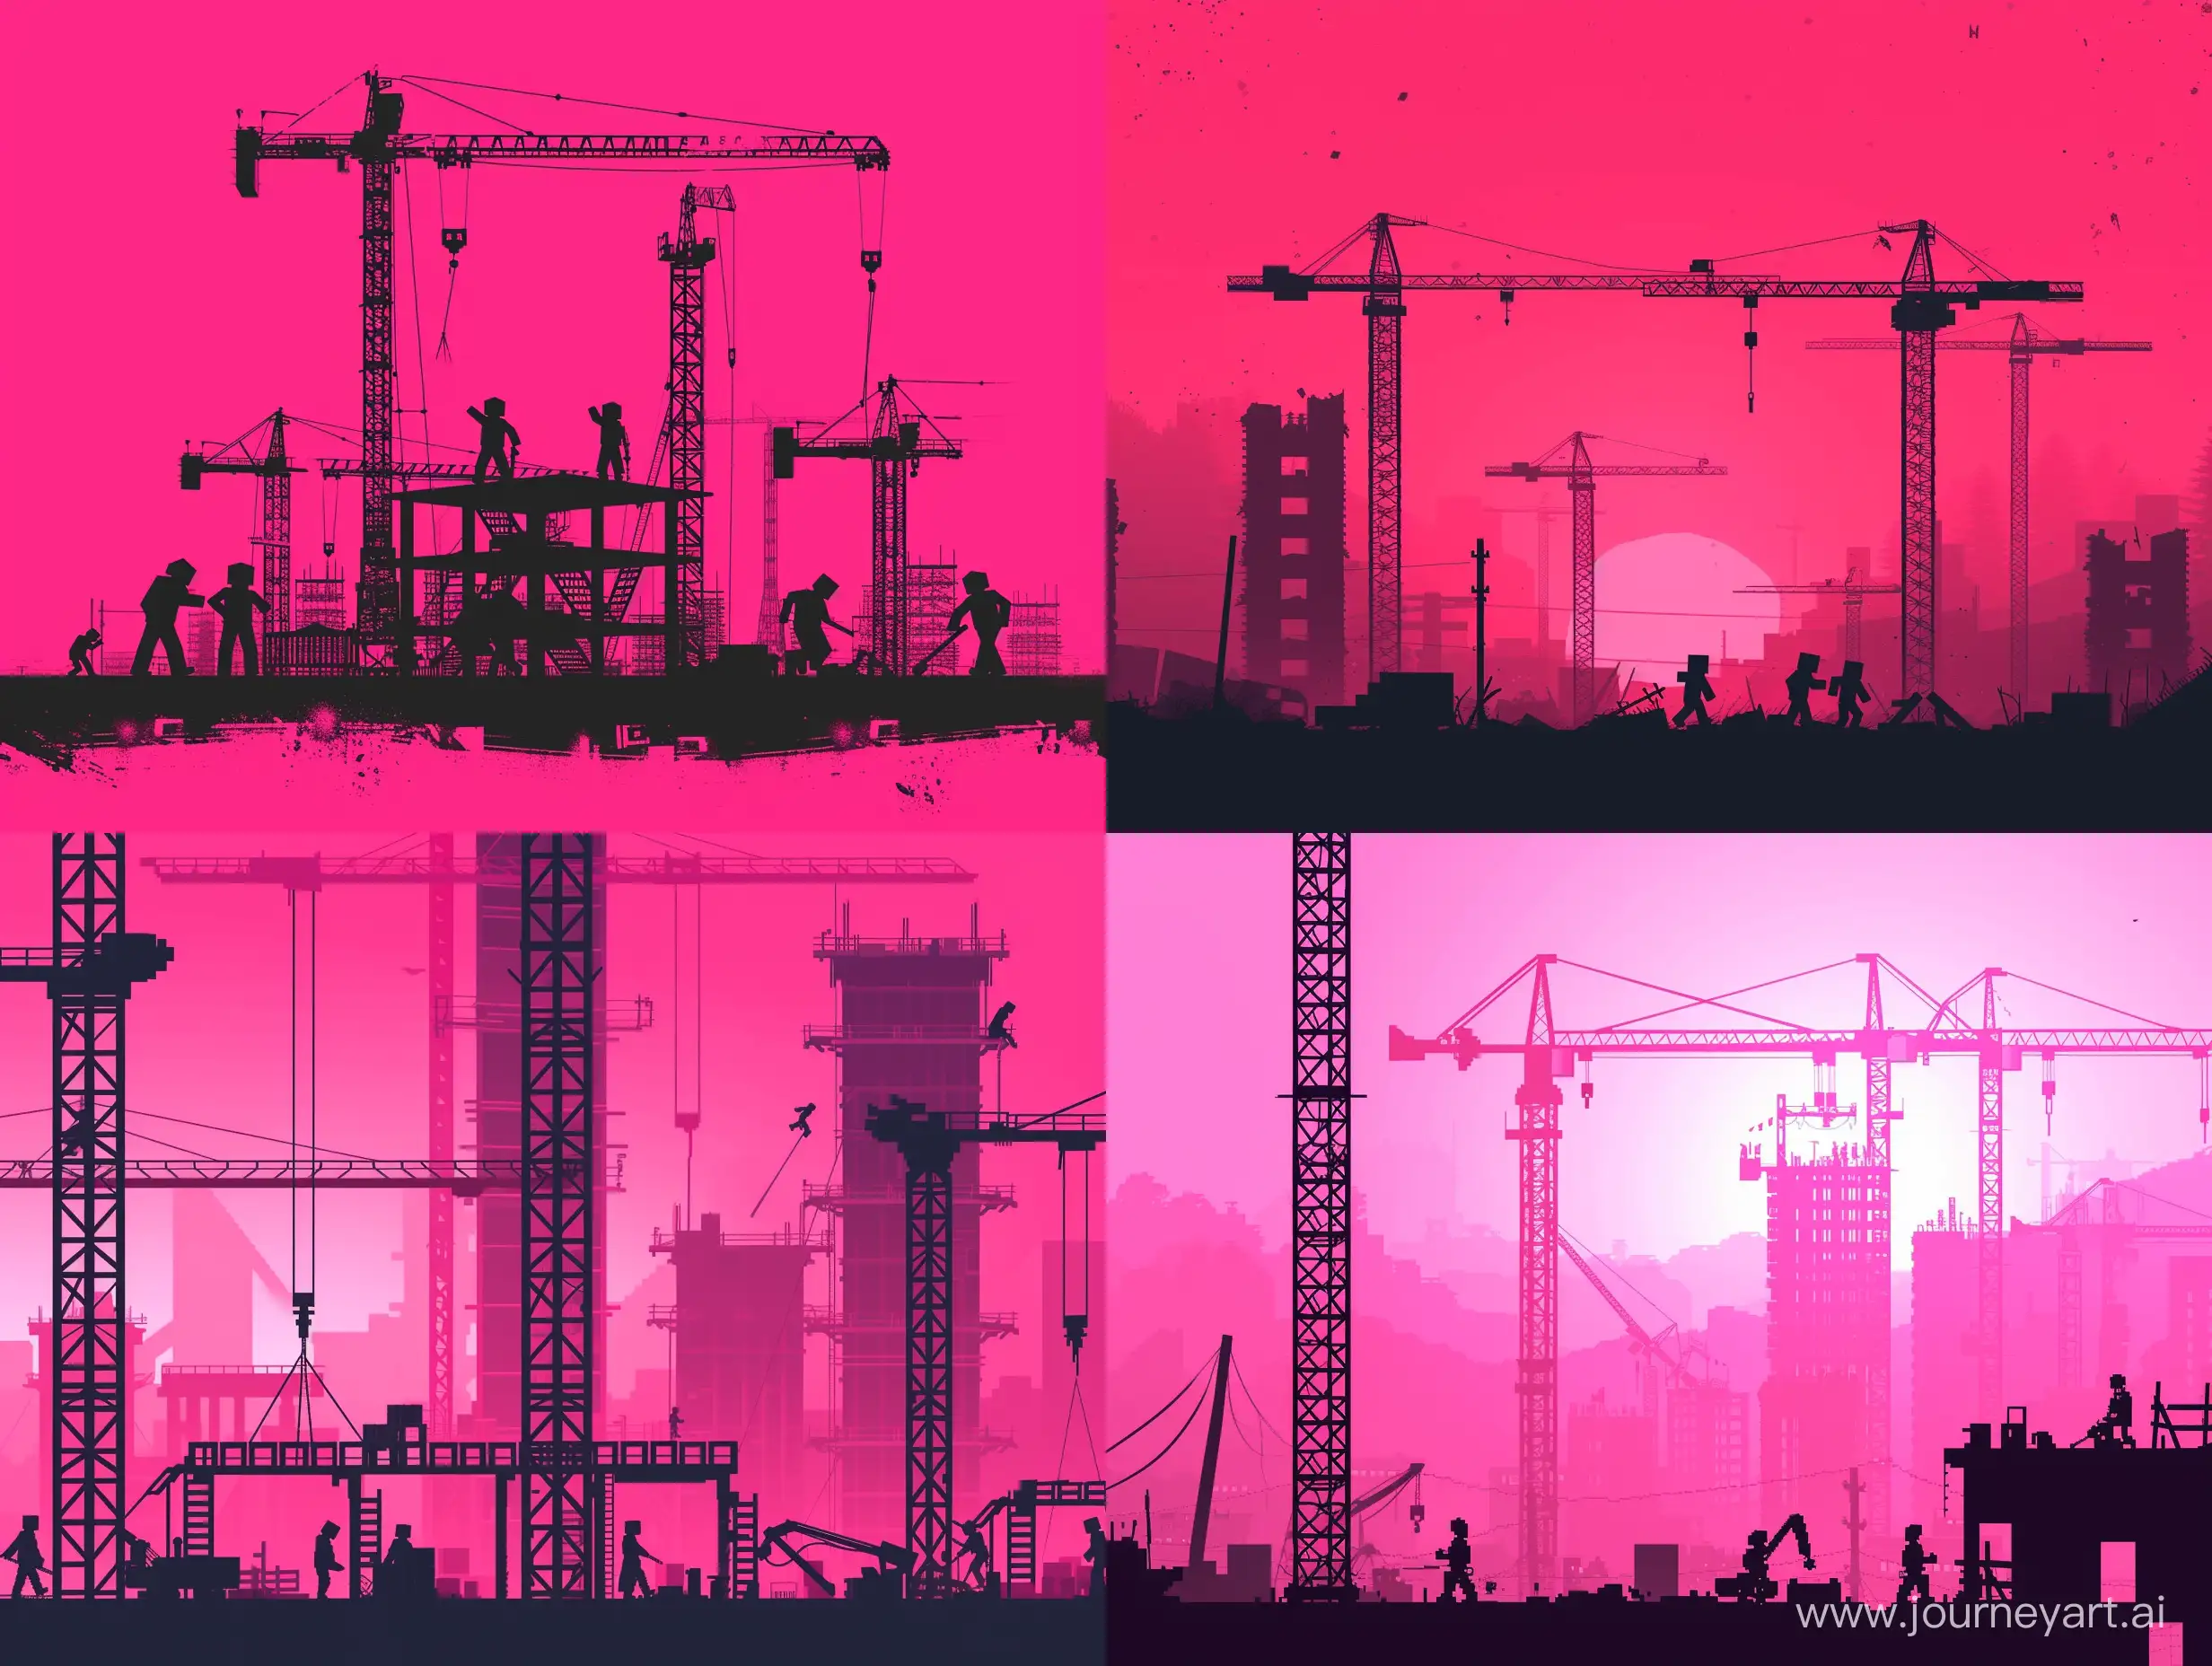 Banner in proportion, HD art. Theme of minecraft logo. The background is pink gradient color,black high-rise cranes in the background, constructivism, vector design, workers, dribbble illustration